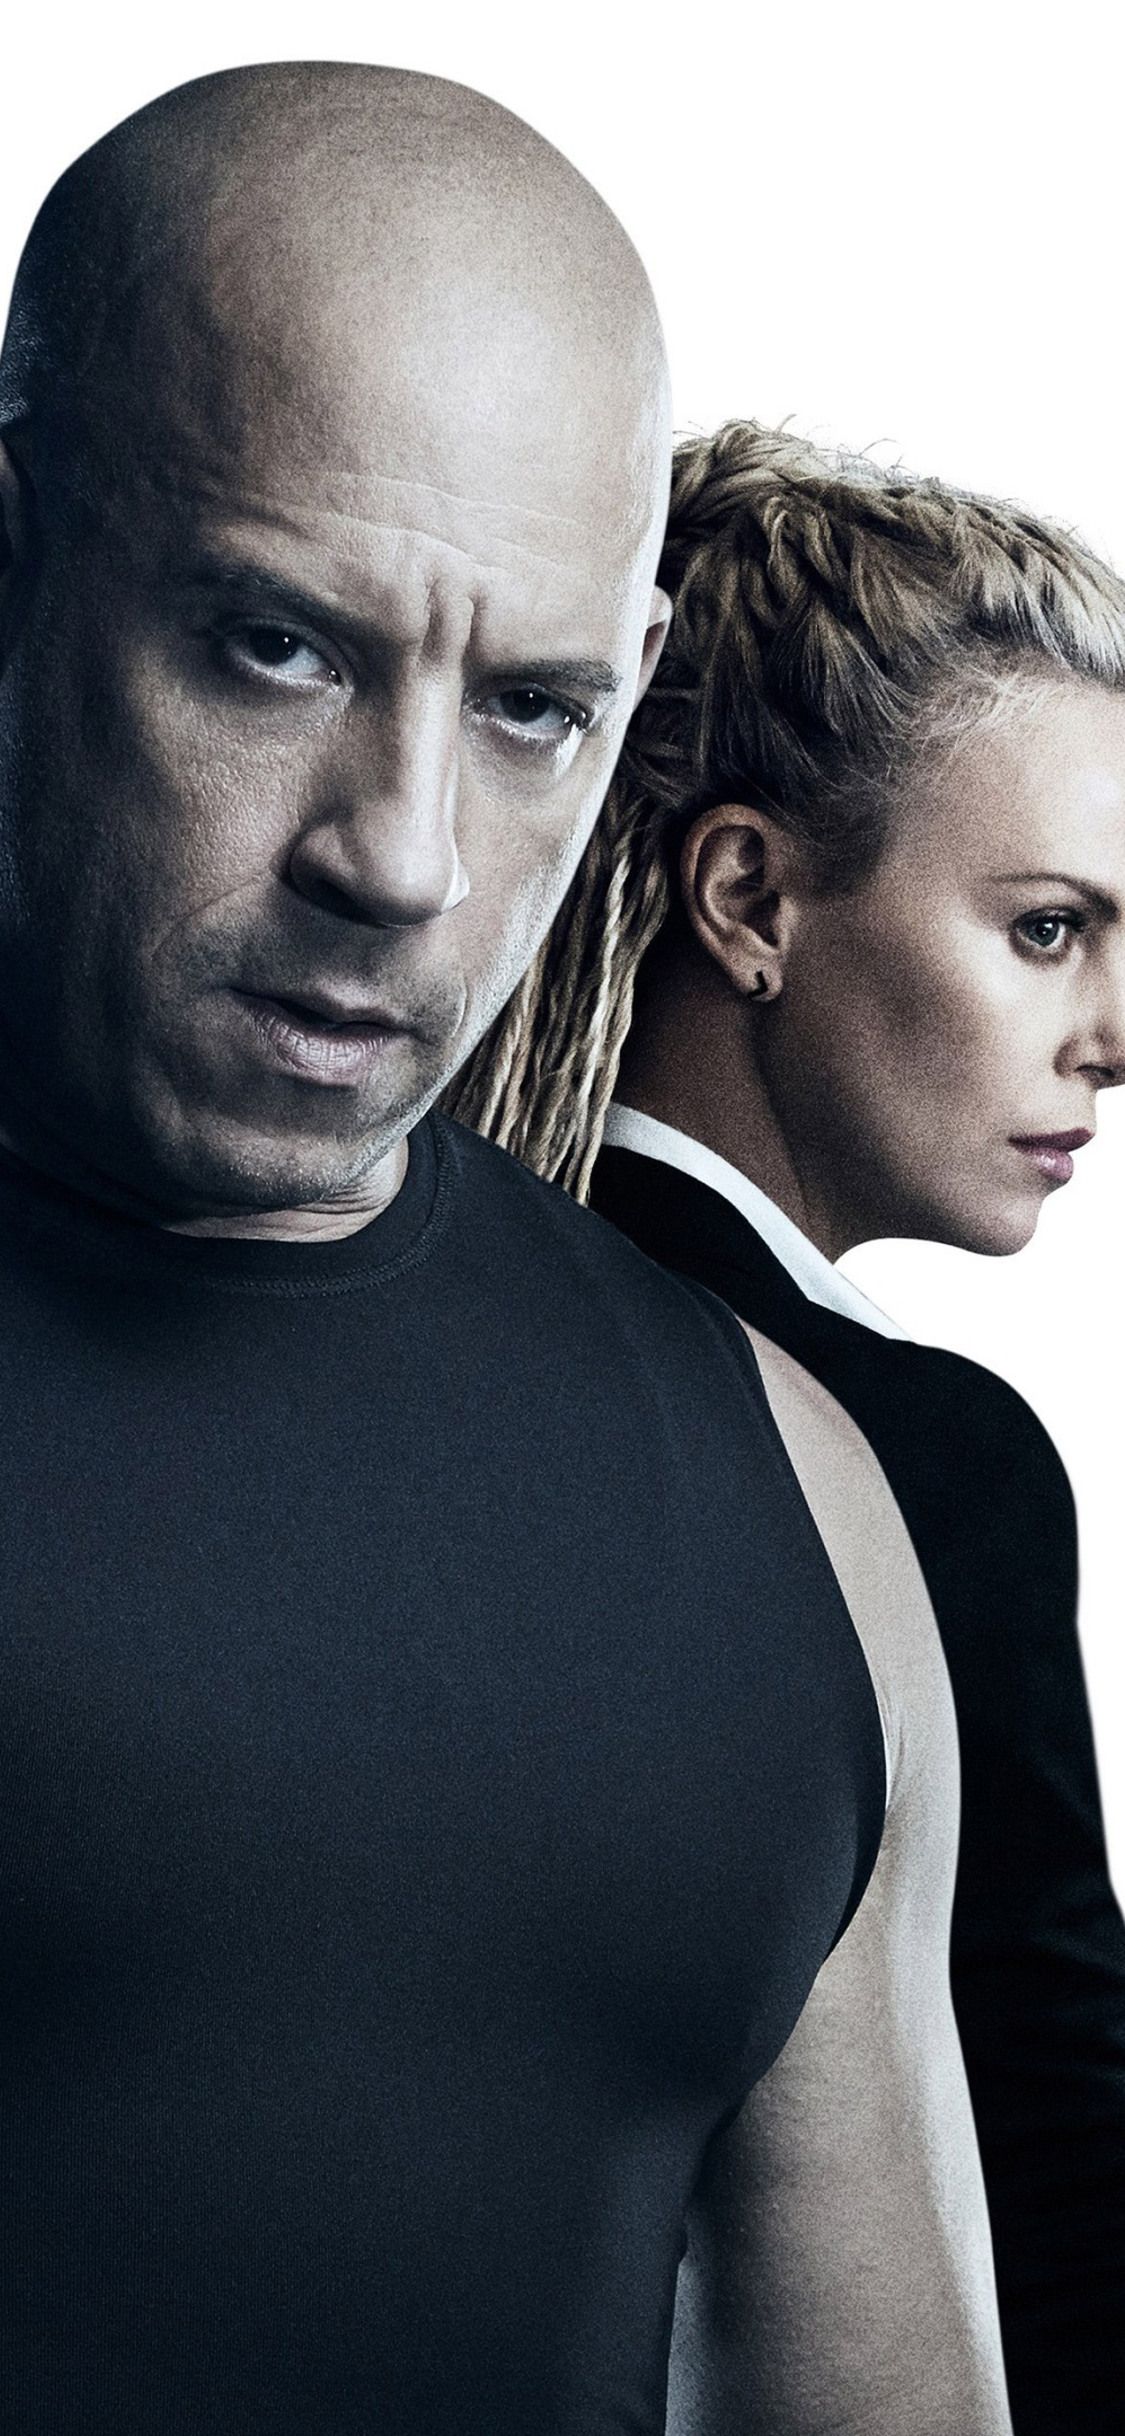 Charlize Theron Vin Diesel The Fate of the Furious